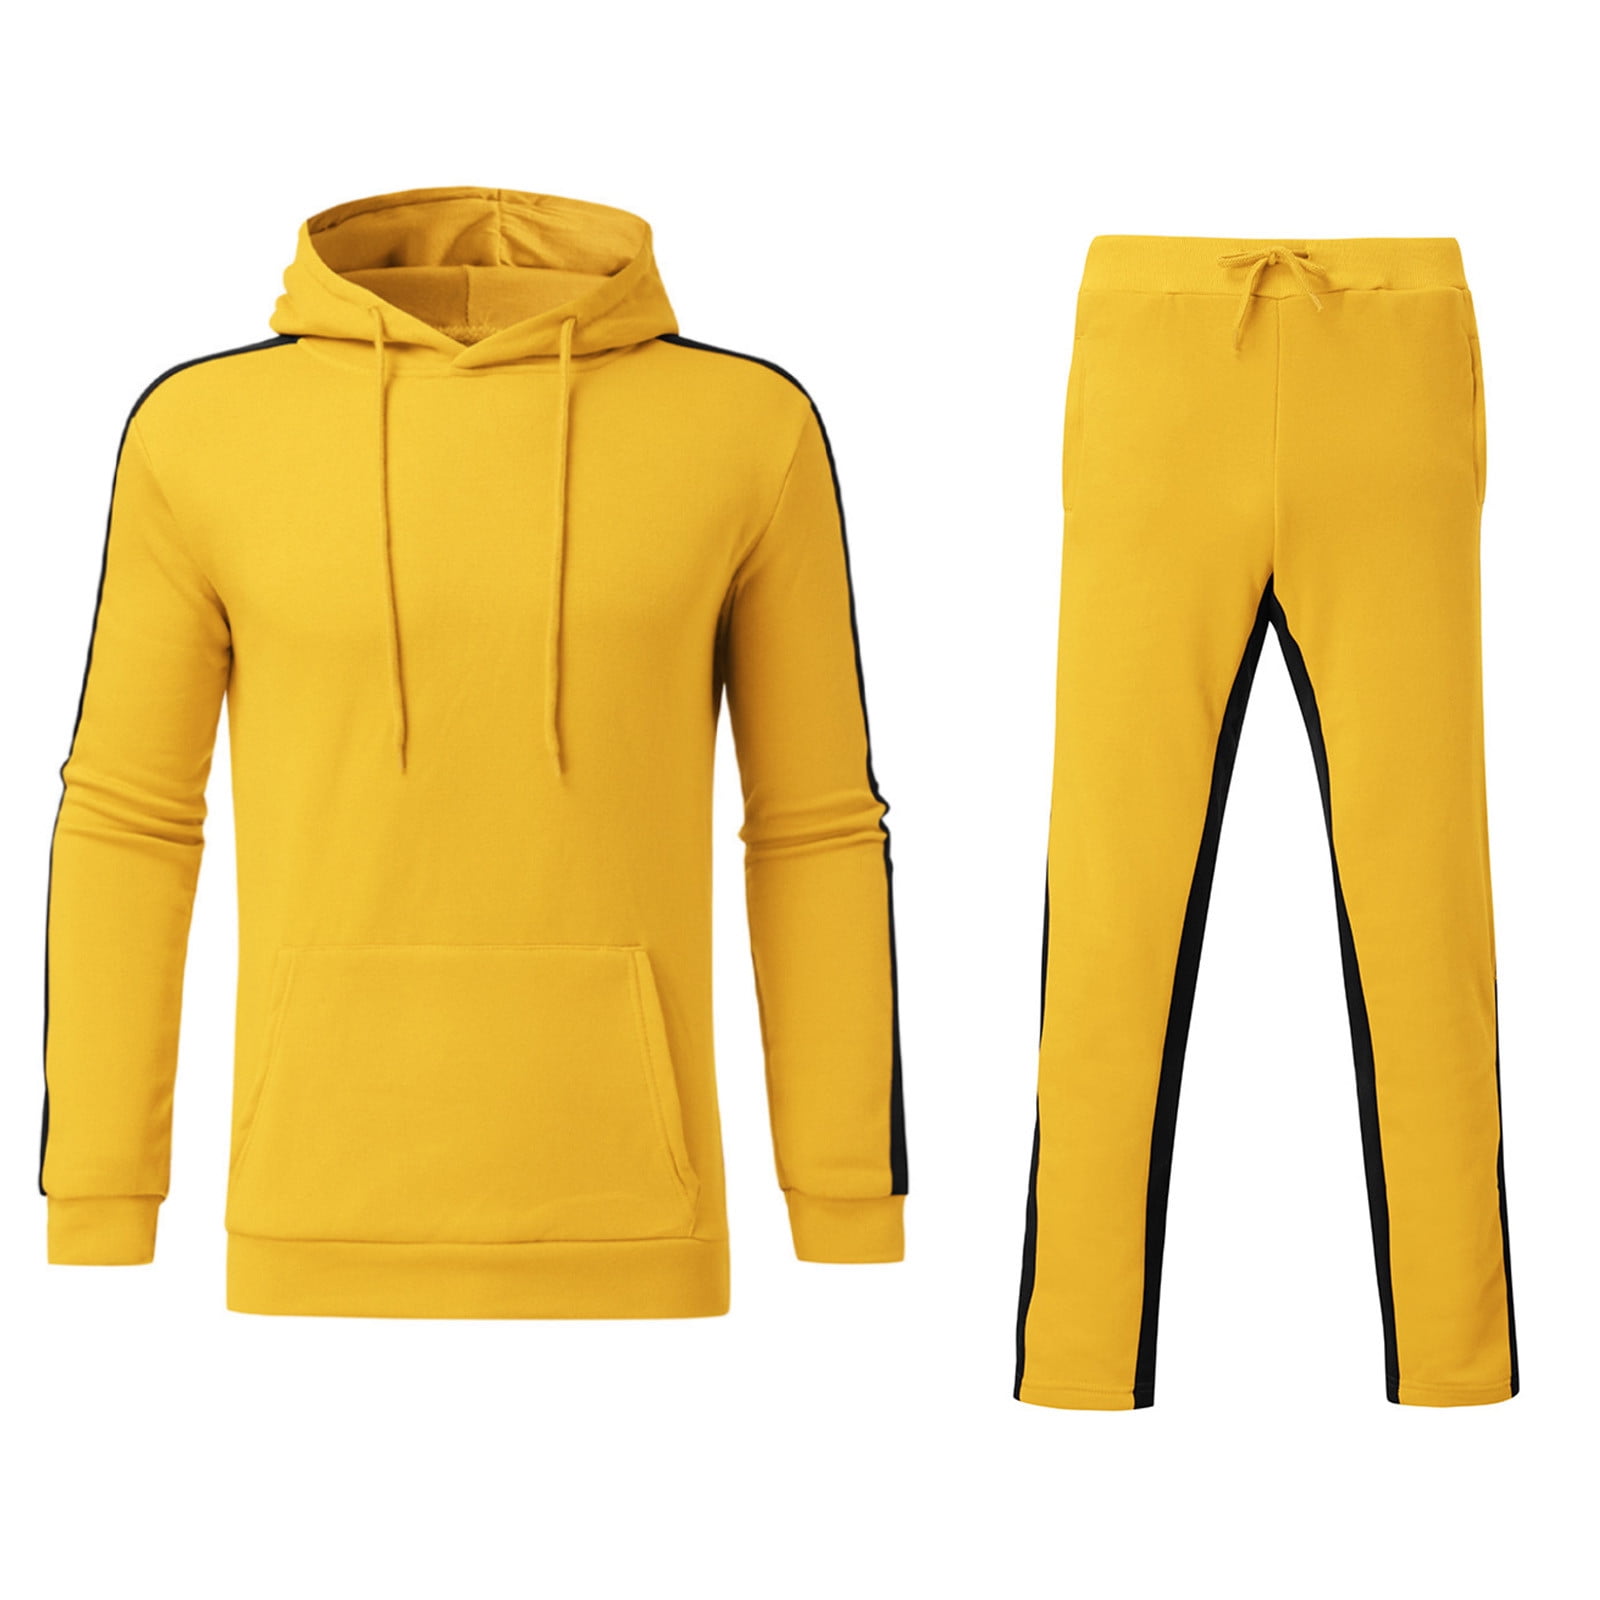 AOOCHASLIY Mens Sweat Suits Sets Clearance Jogging Suits Spring Winter ...